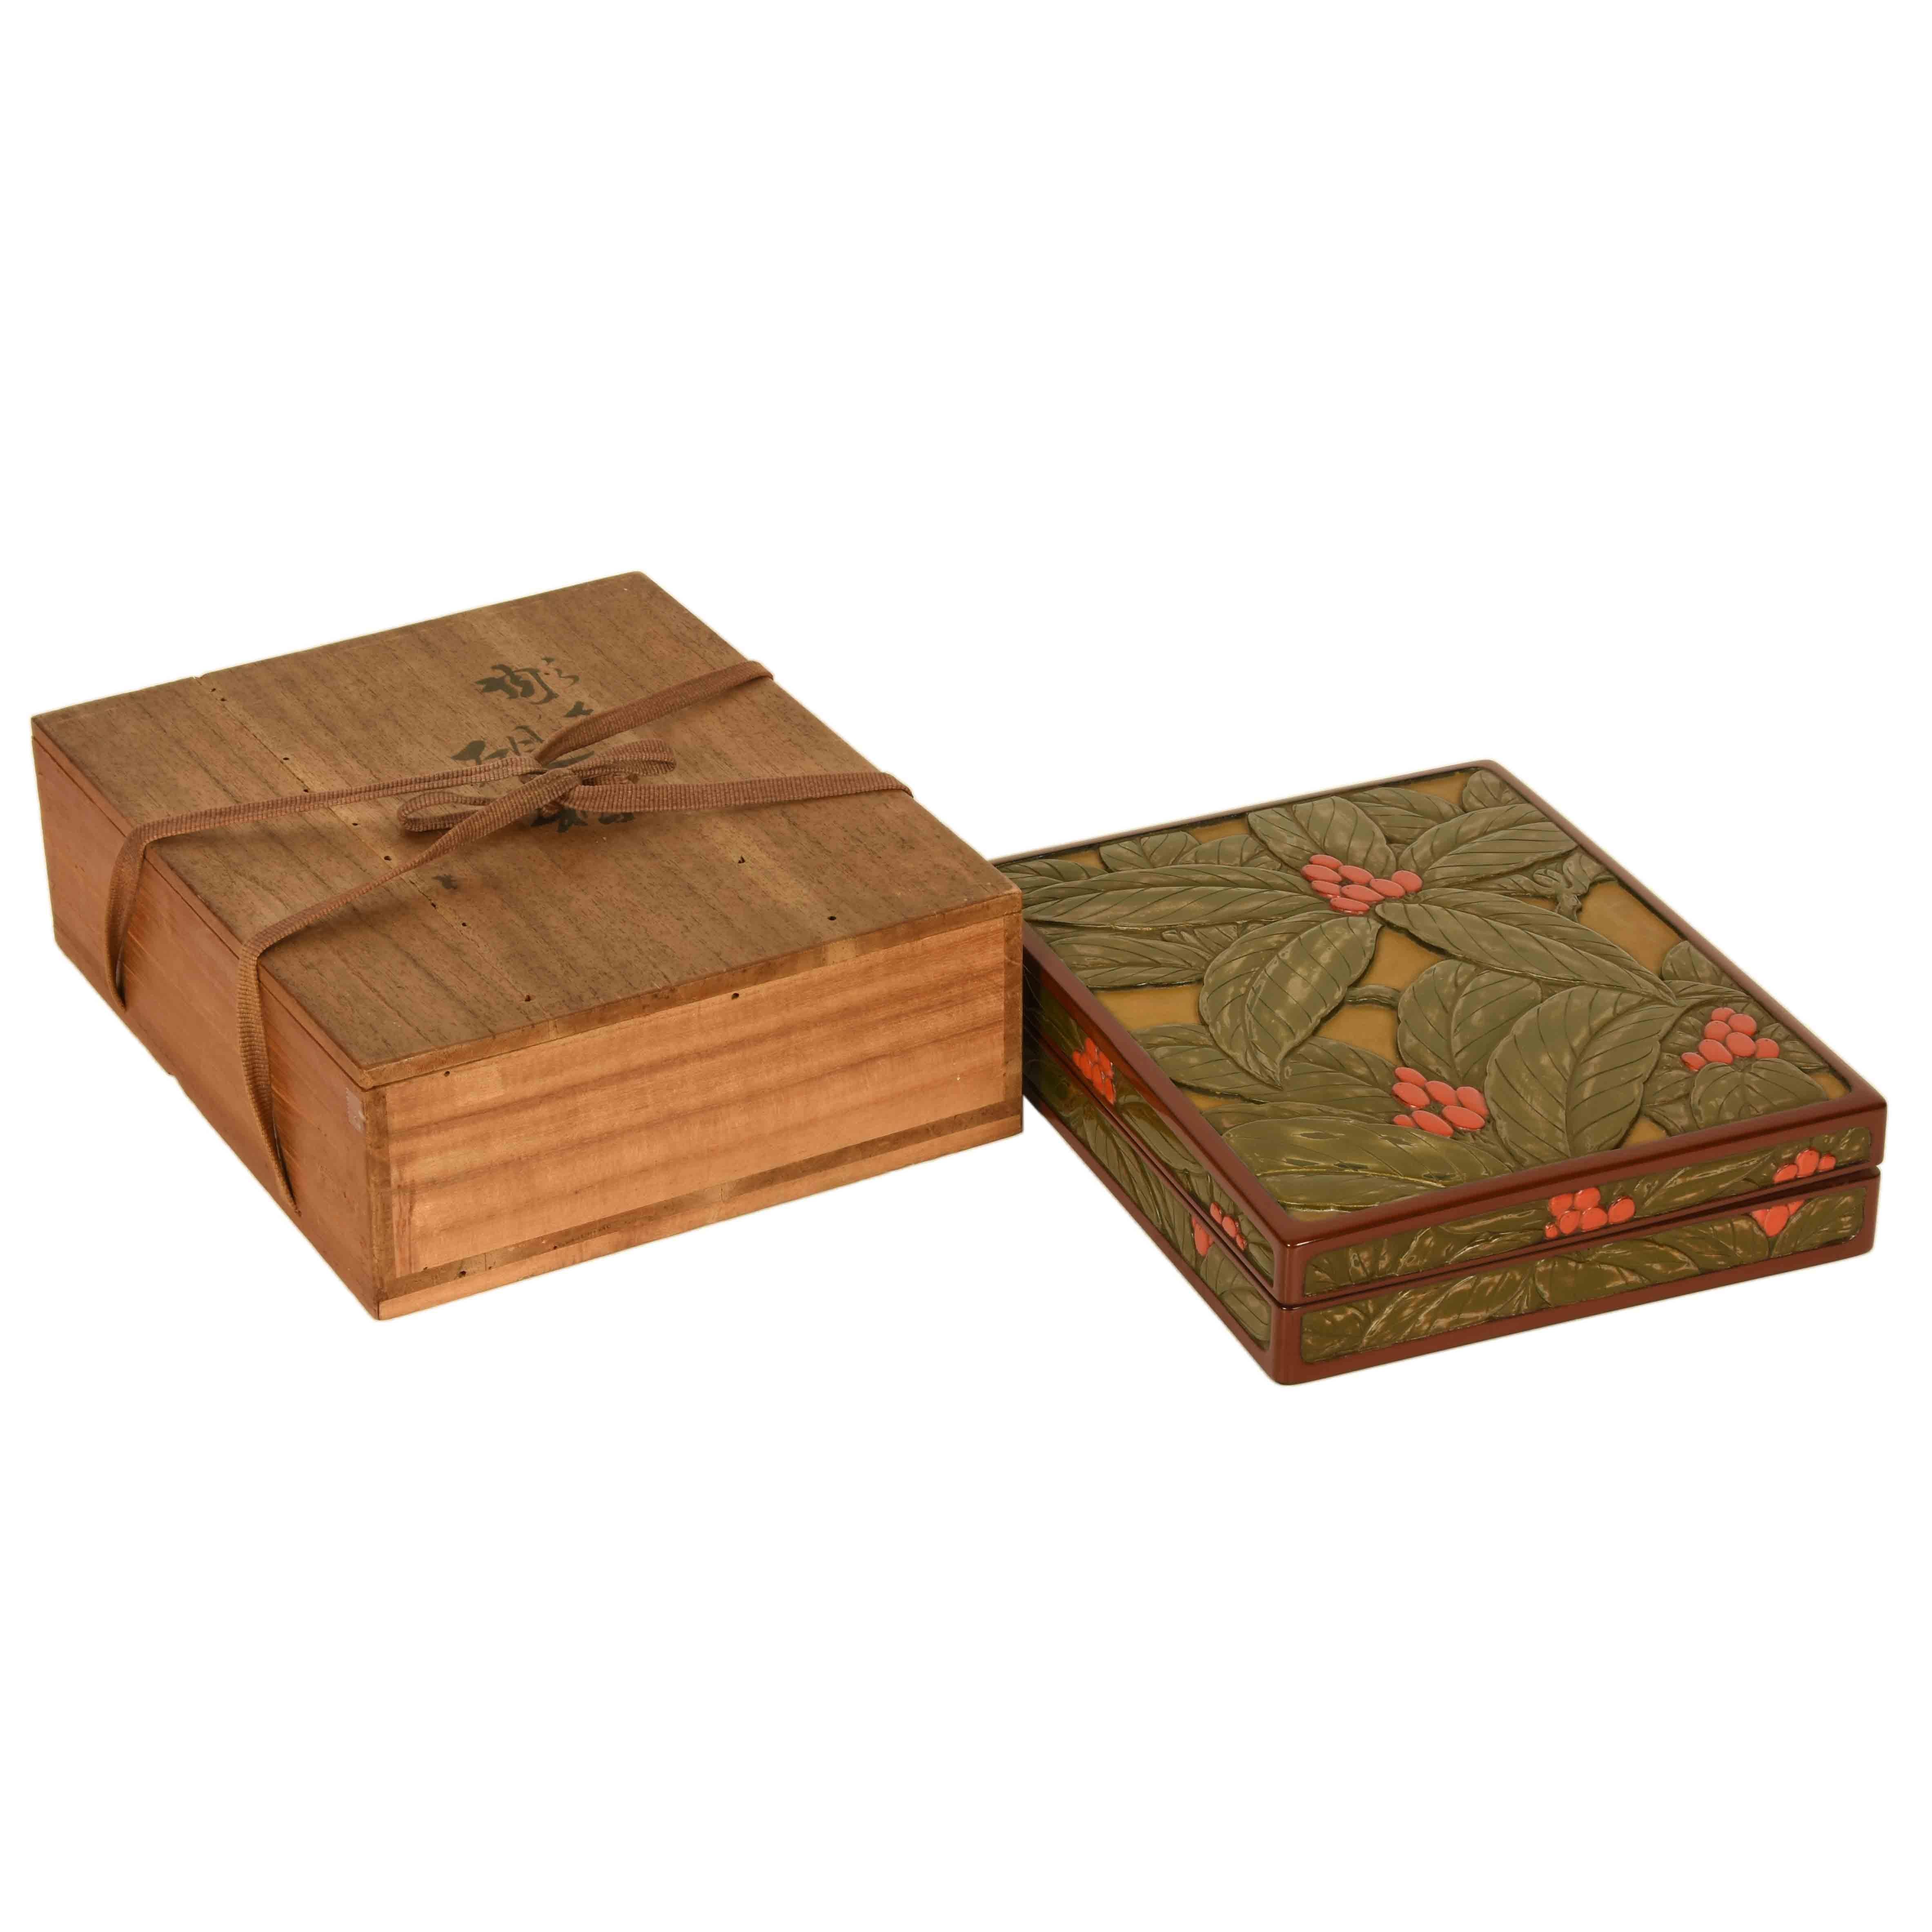 A vintage Japanese Tsuzuri bako, writing box. with an unusual, deeply carved relief of Japanese sarcandra glabra, a woody herbal sub-shrub native to Asia with deep green glossy leaves and red berry like fruit. Kamakura lacquerware is primarily made